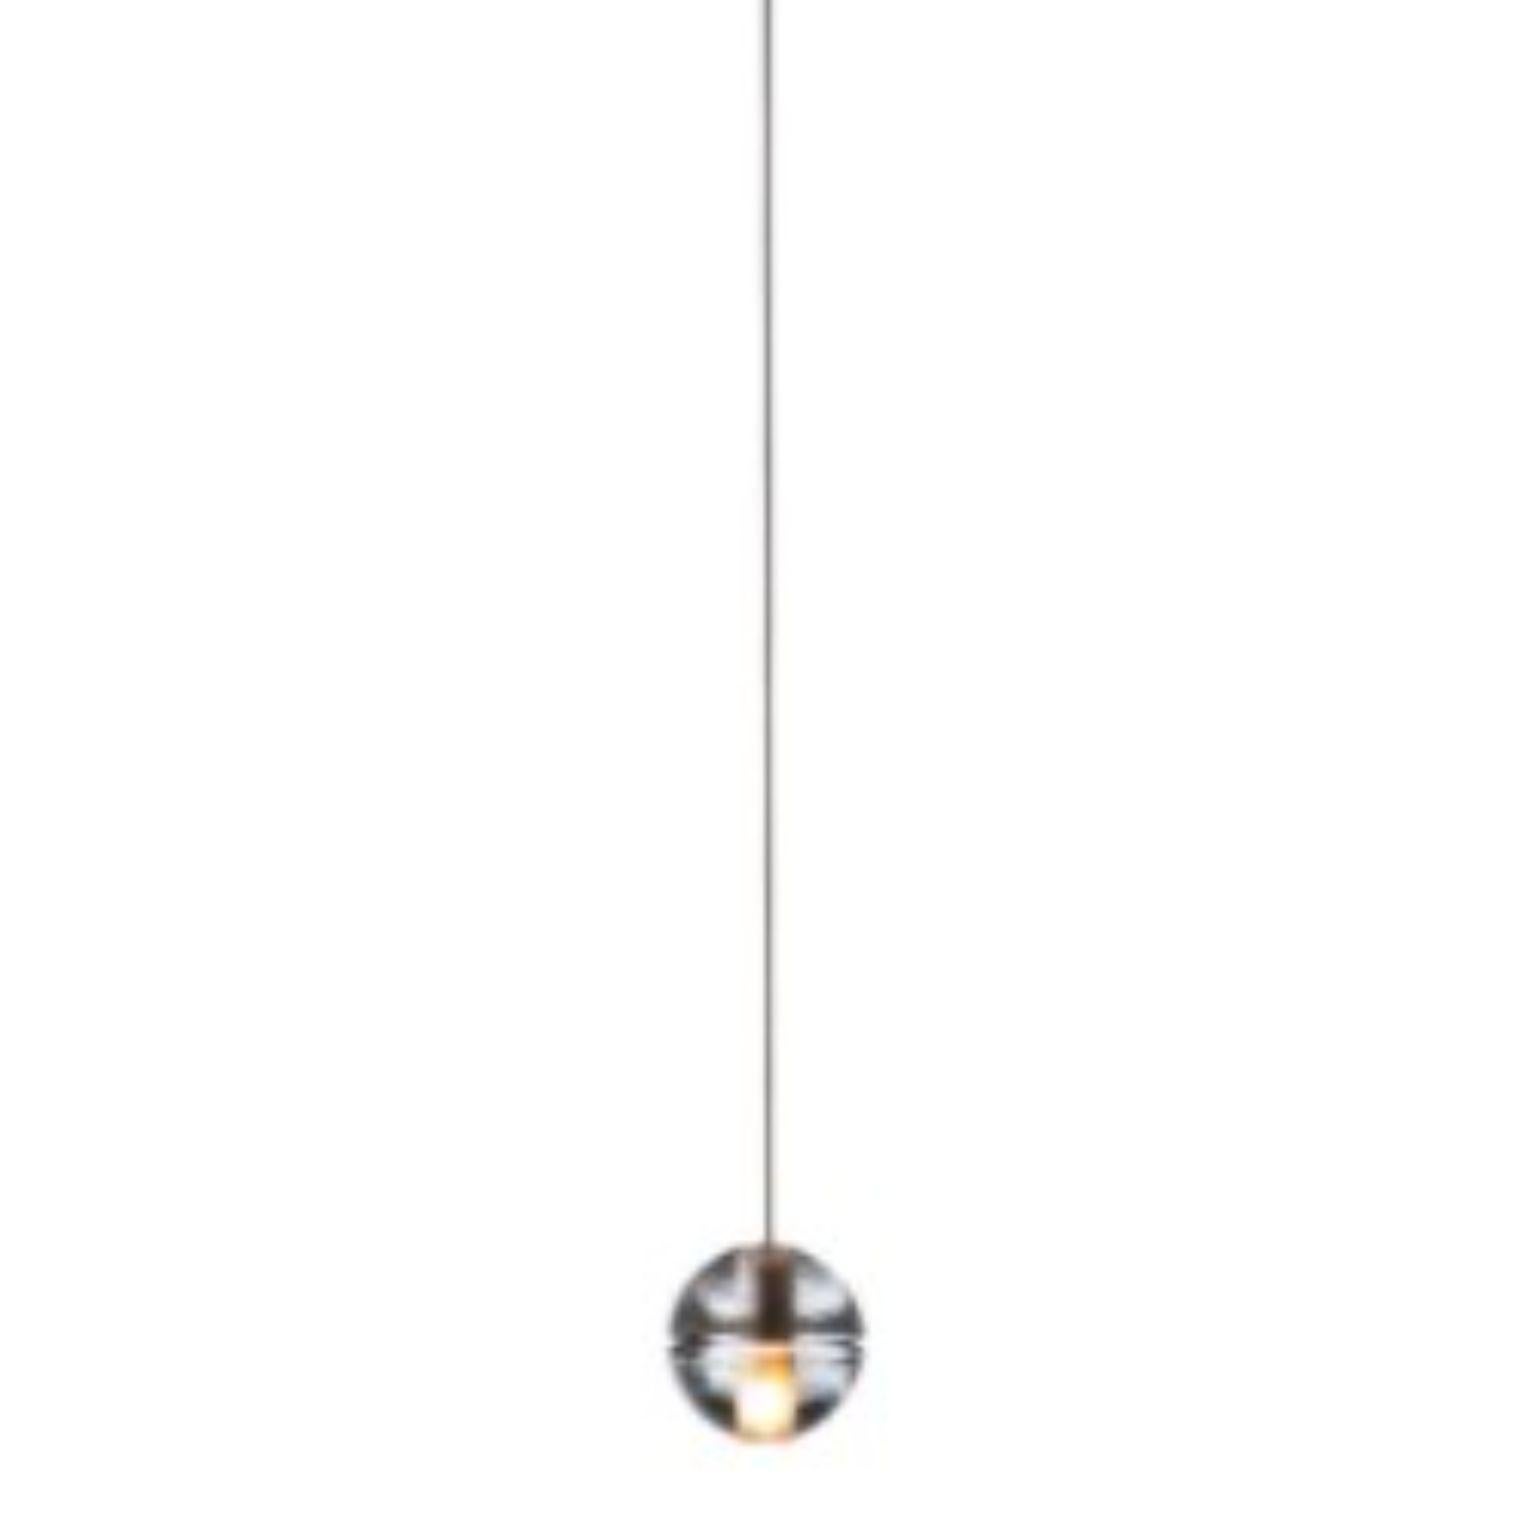 14.1 Single pendant by Bocci
Dimensions: D 11.6 x H 300 cm
Materials: brushed nickel
Weight: 2 kg
Adjustable lengths, Other materials and dimensions can be ordered.

All our lamps can be wired according to each country. If sold to the USA it